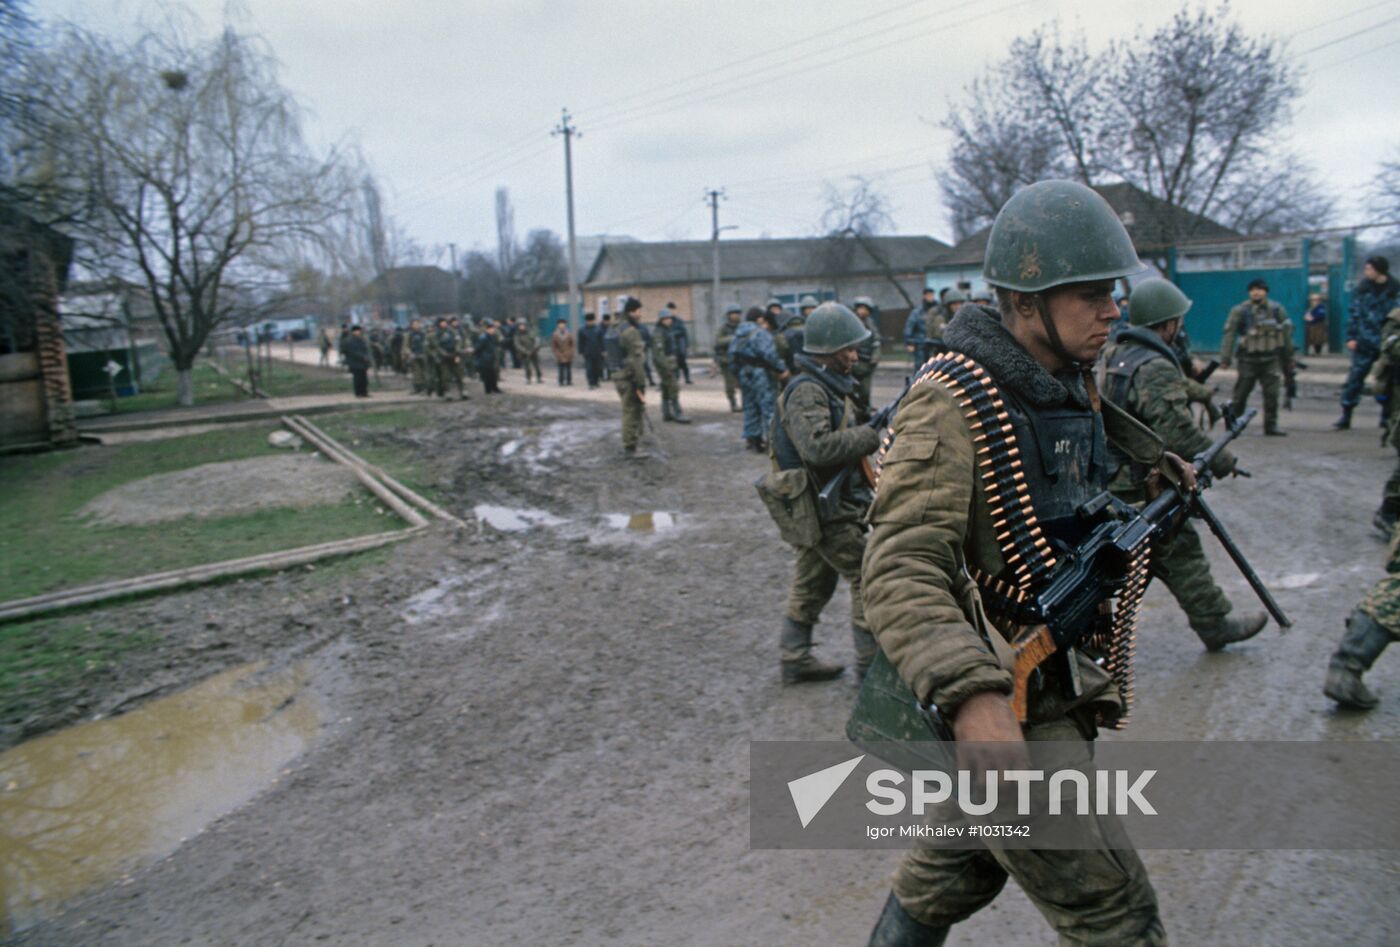 Russian soldiers in Chechnya